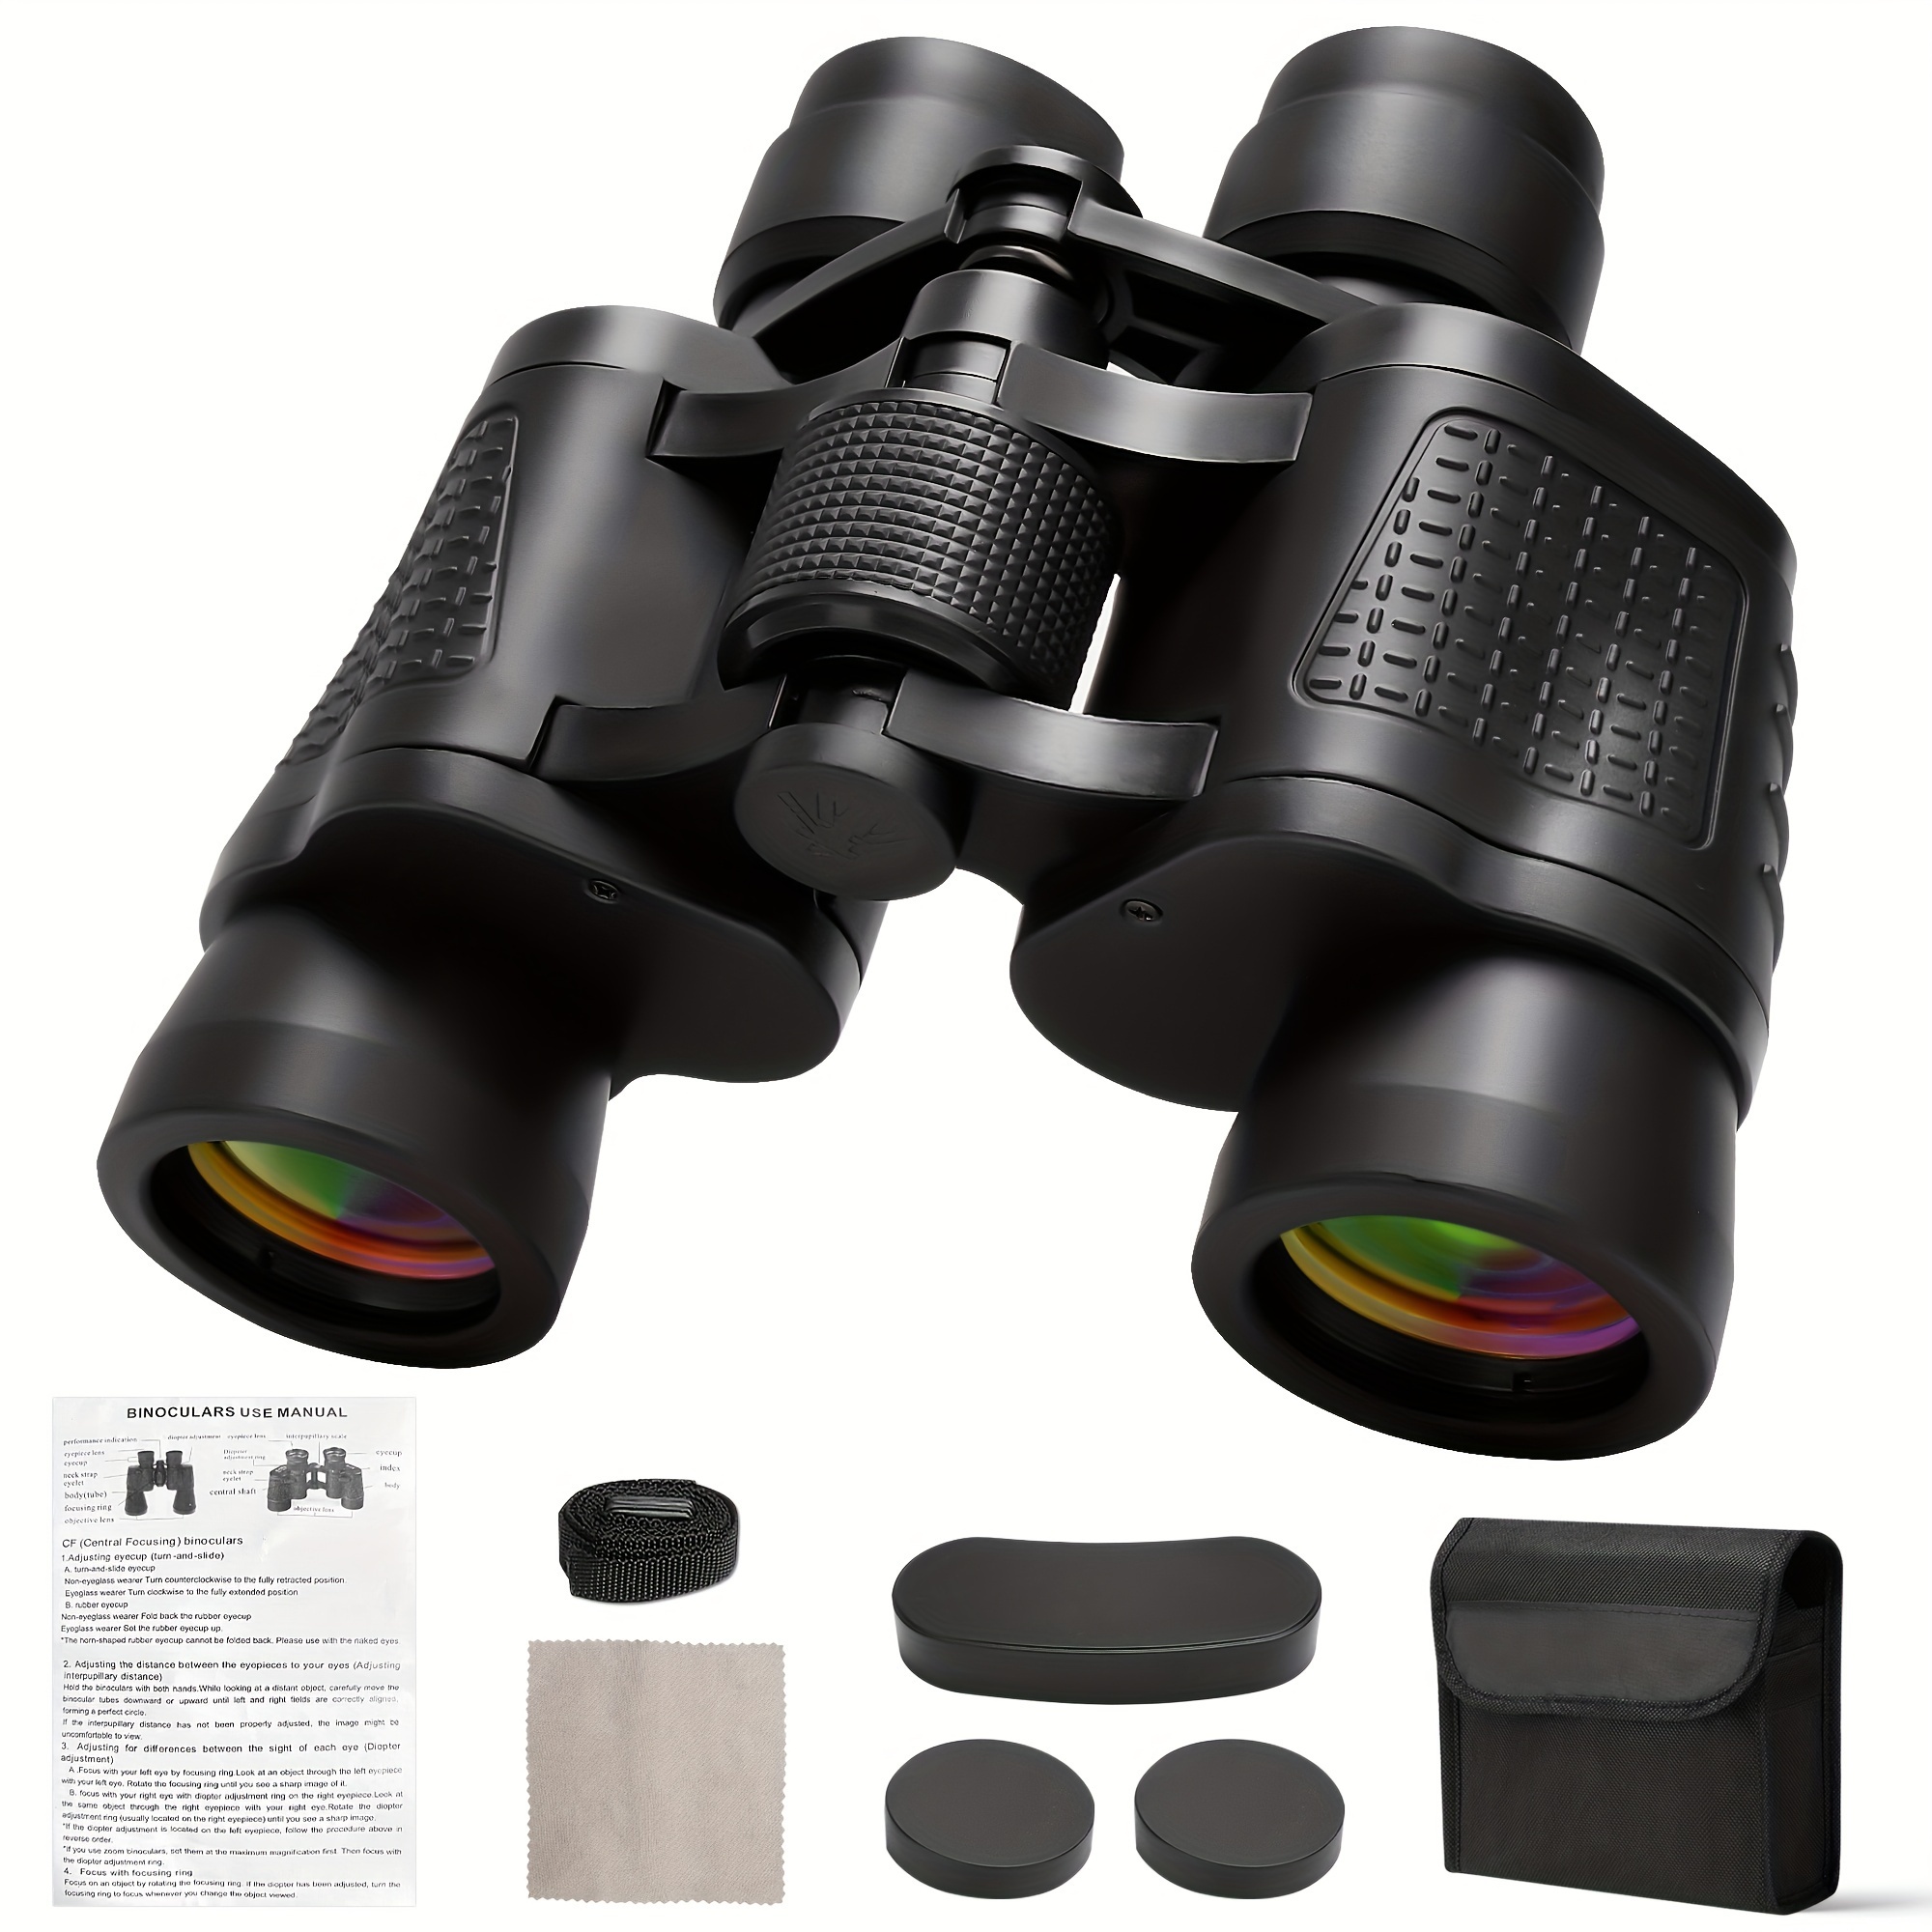 

80x80 Binoculars For Adults Bird Watching Sports Travel Hunting Theater Concerts Waterproof Bak4 Lens With Carrying Bag